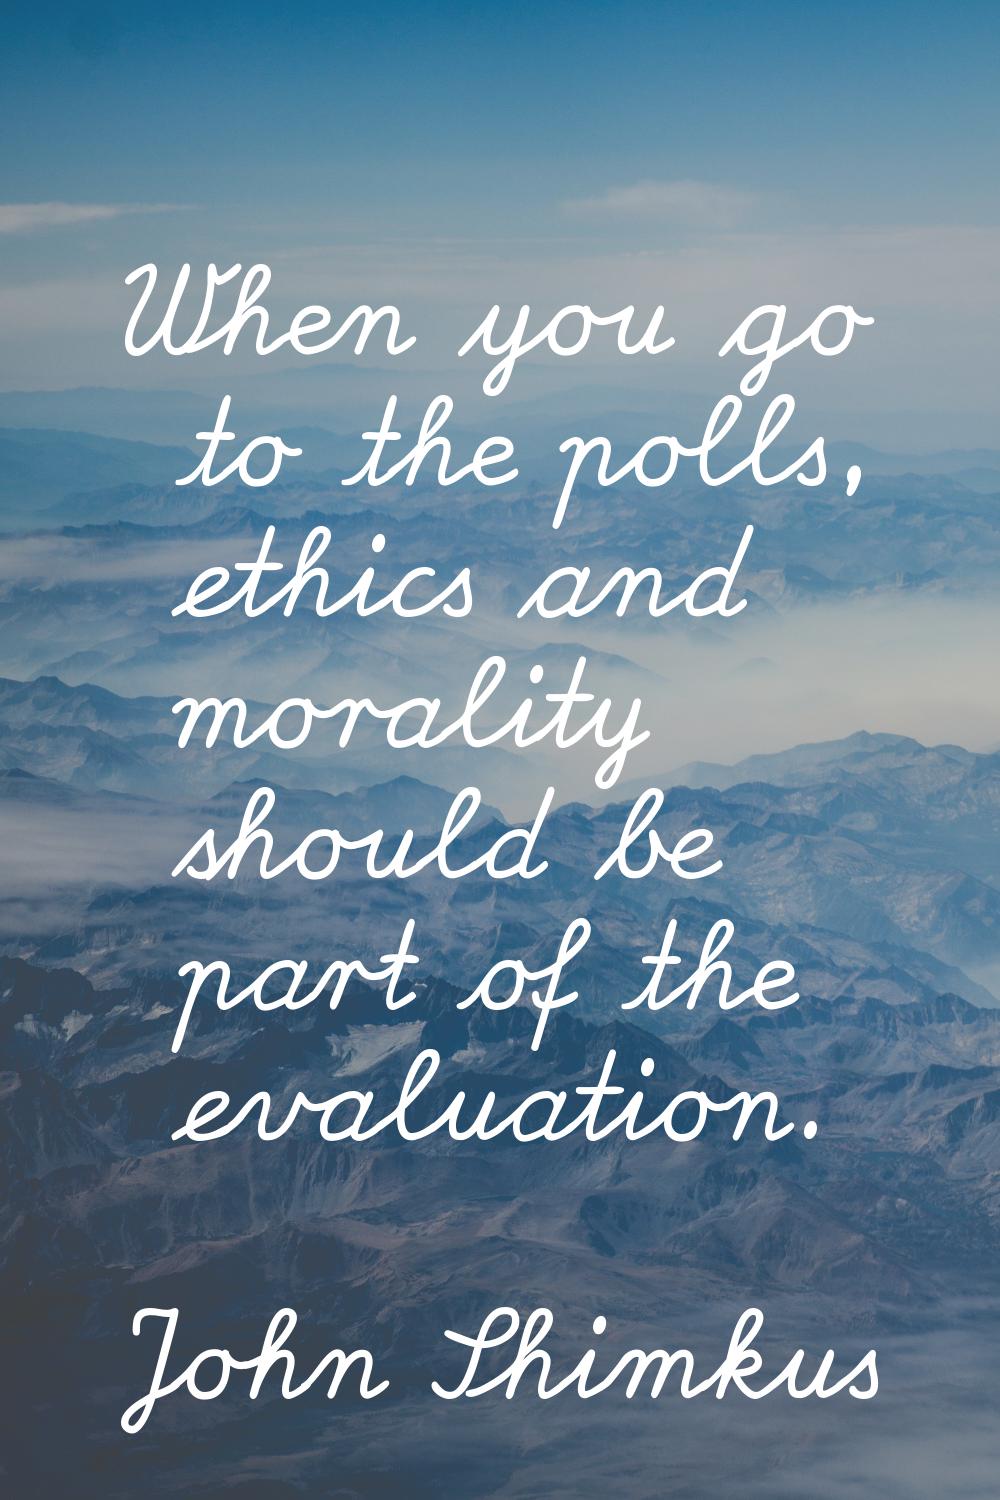 When you go to the polls, ethics and morality should be part of the evaluation.